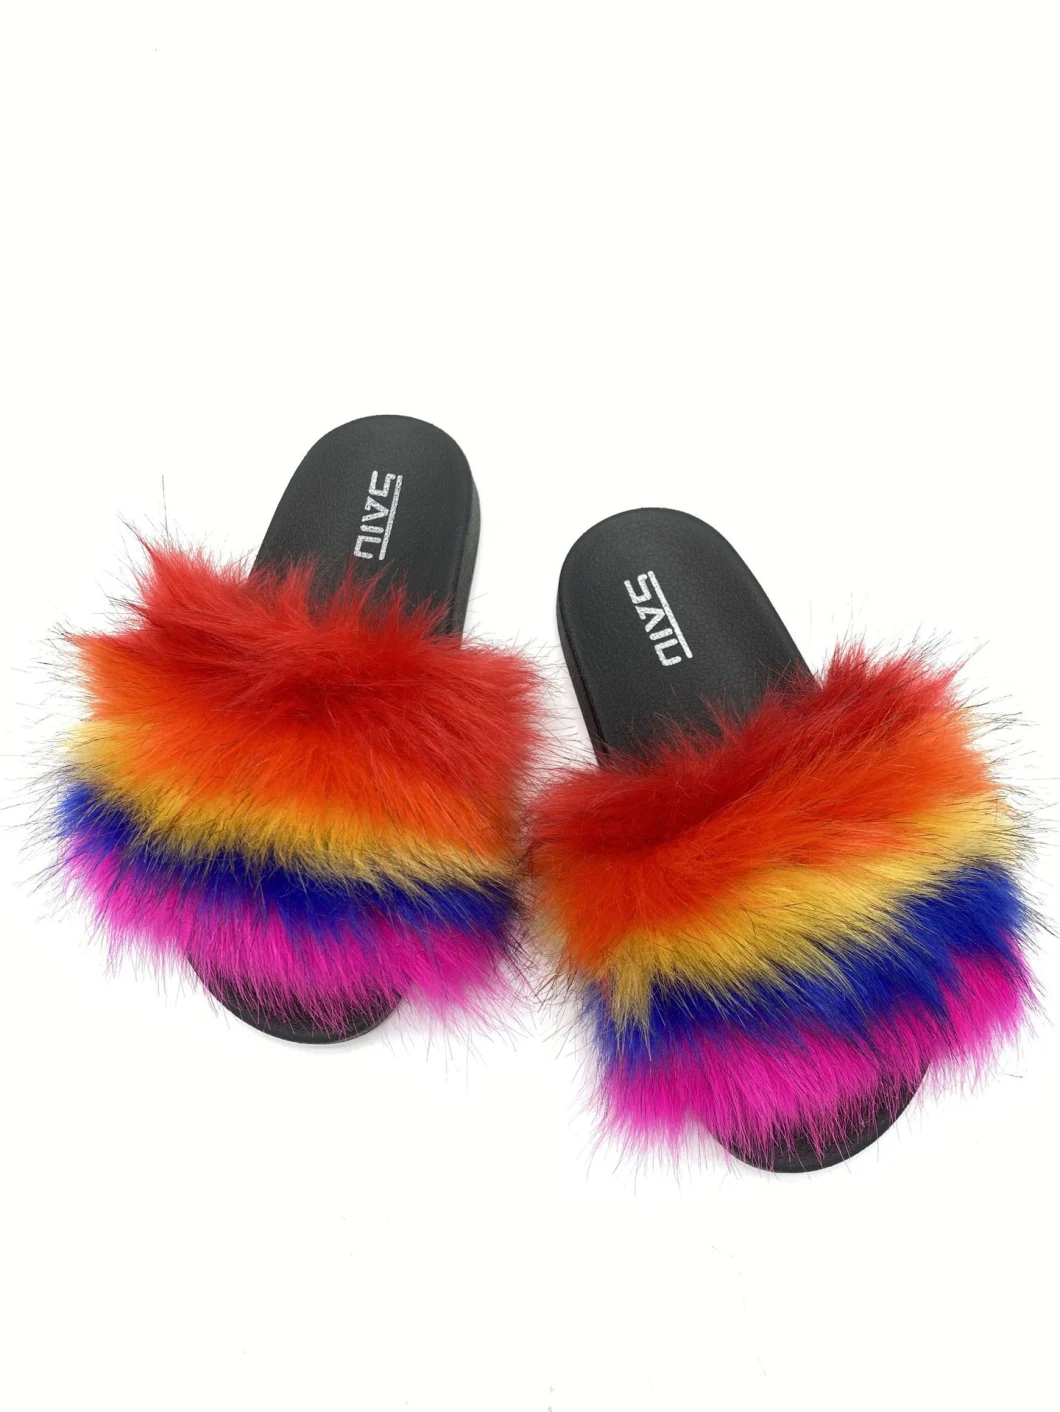 New Design Whoelsale Fur Slippers, Women Fashion Fox Furry Fluffy Sandals Slippers